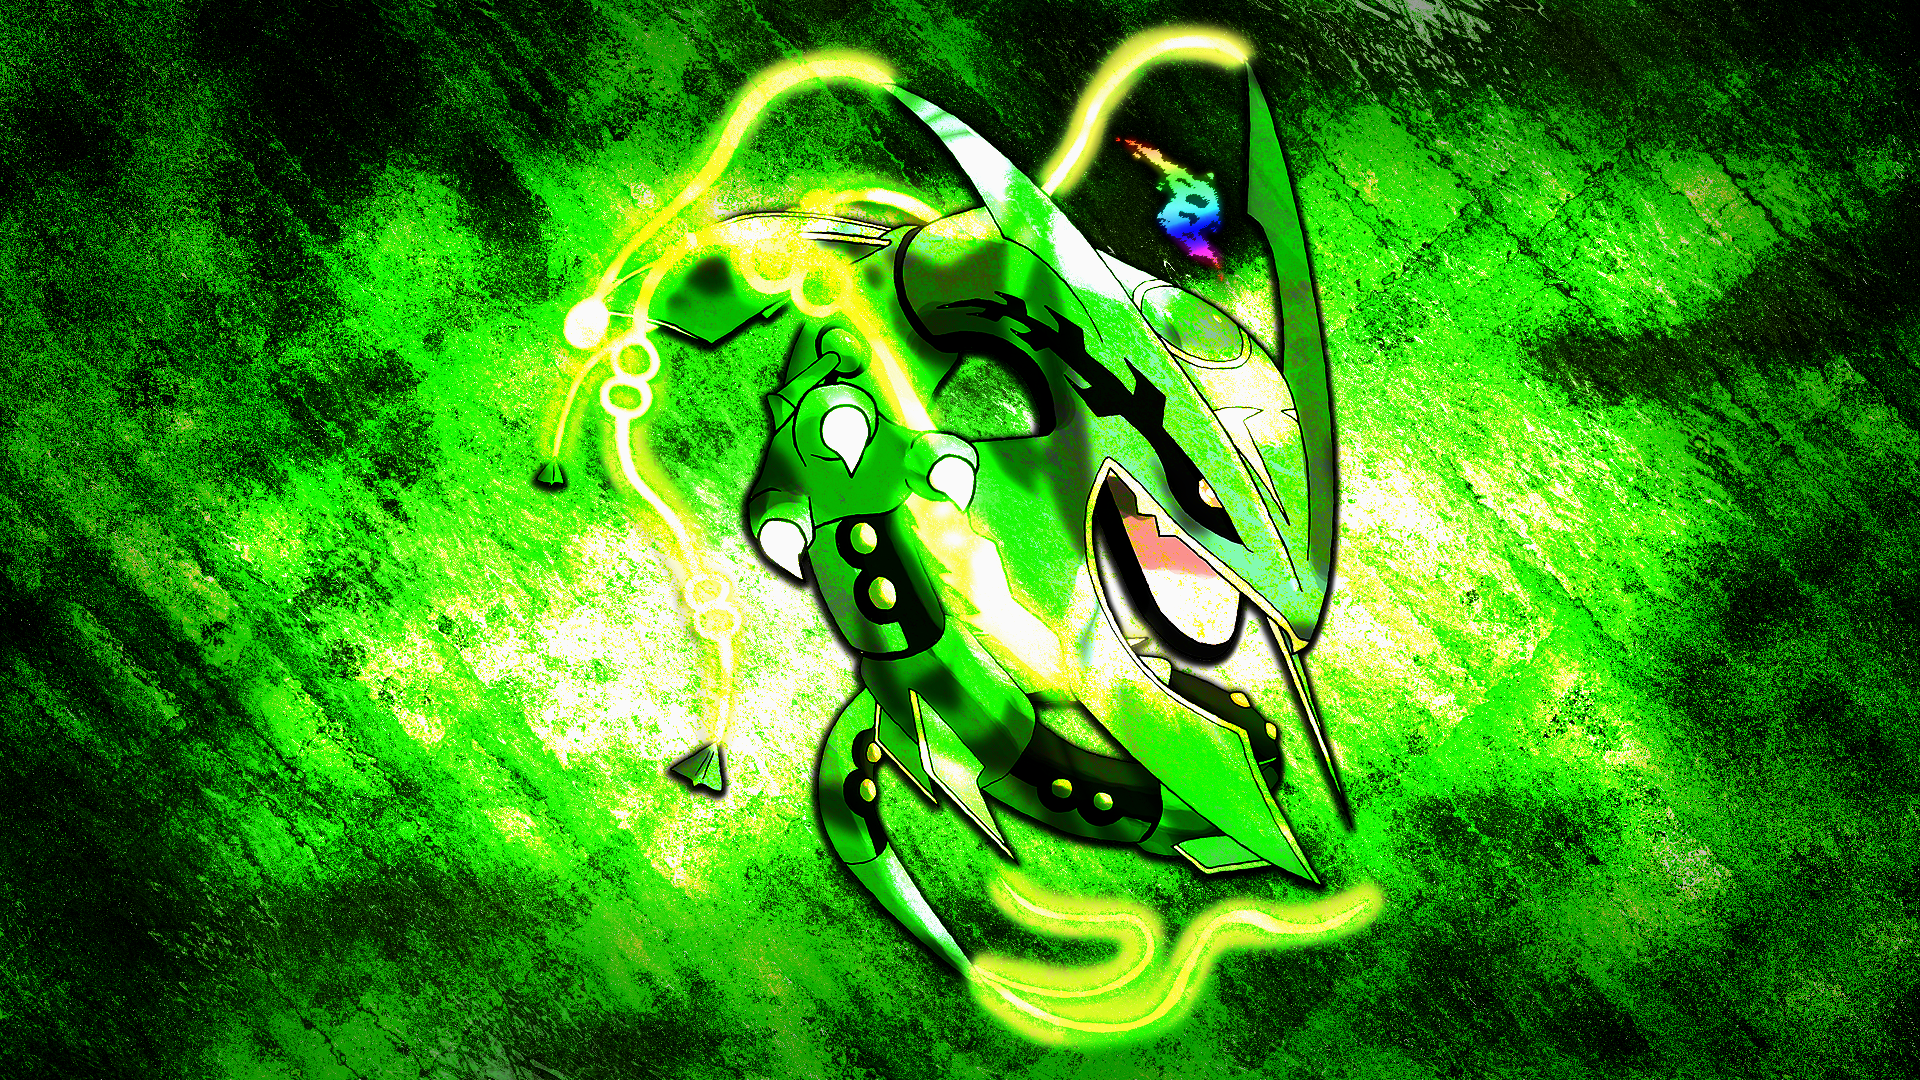 Free download Mega Rayquaza Wallpaper by Glench [1920x1080] for your Desktop, Mobile & Tablet. Explore Shiny Mega Rayquaza Wallpaper. Mega Pokemon Wallpaper, Pokemon Rayquaza Wallpaper